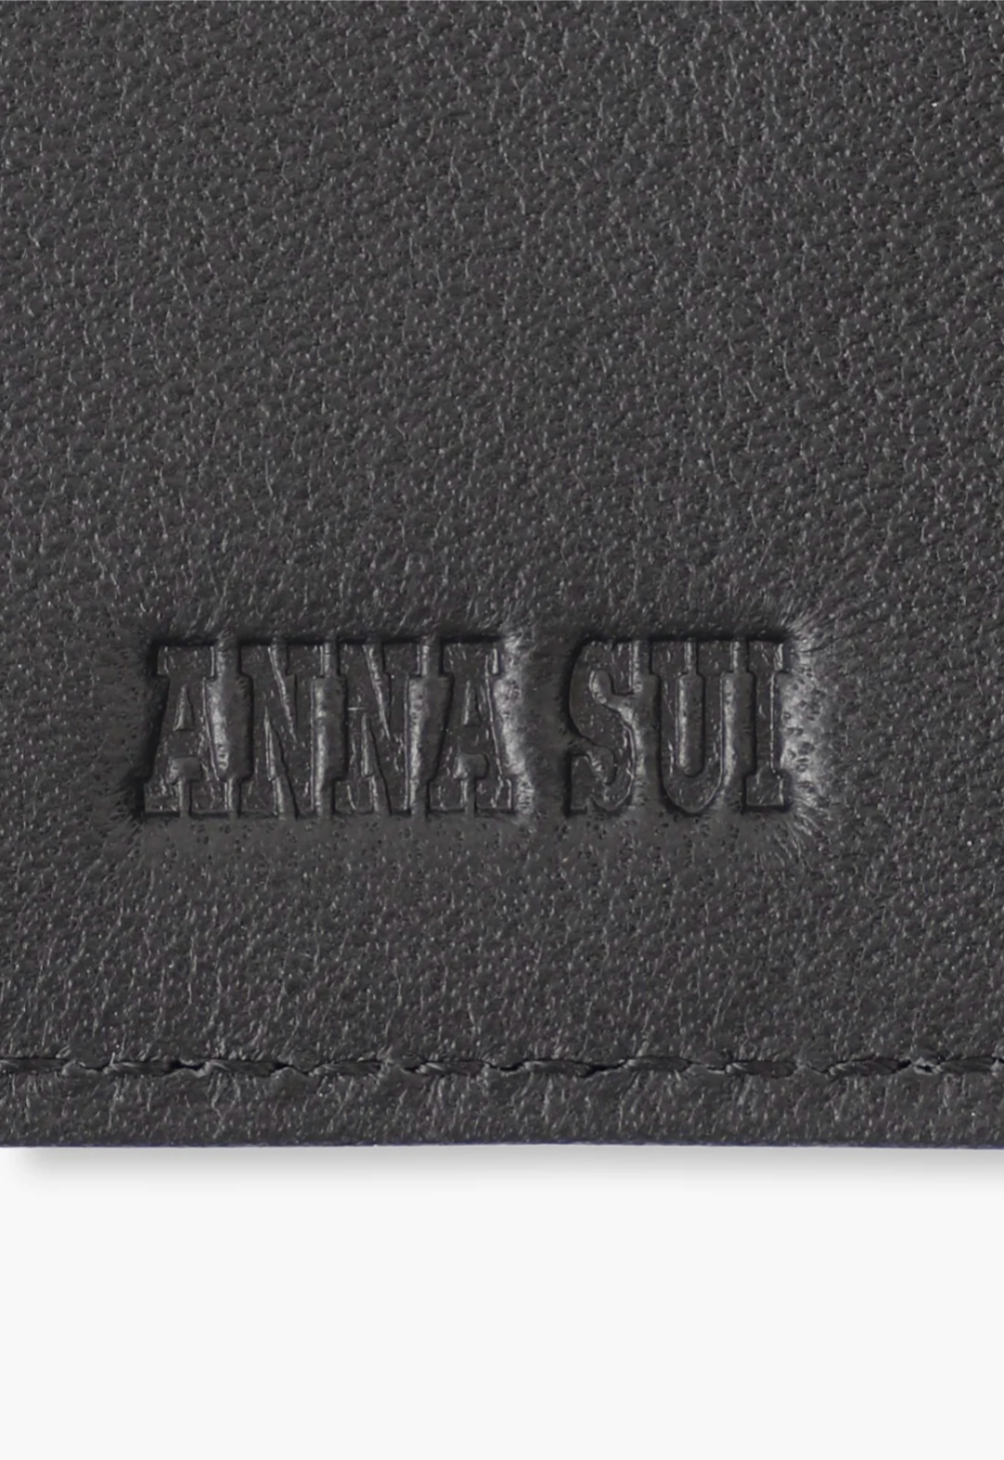 Small Roger Wallet wine, detail of the Anna Sui Raised logo and large black stiches